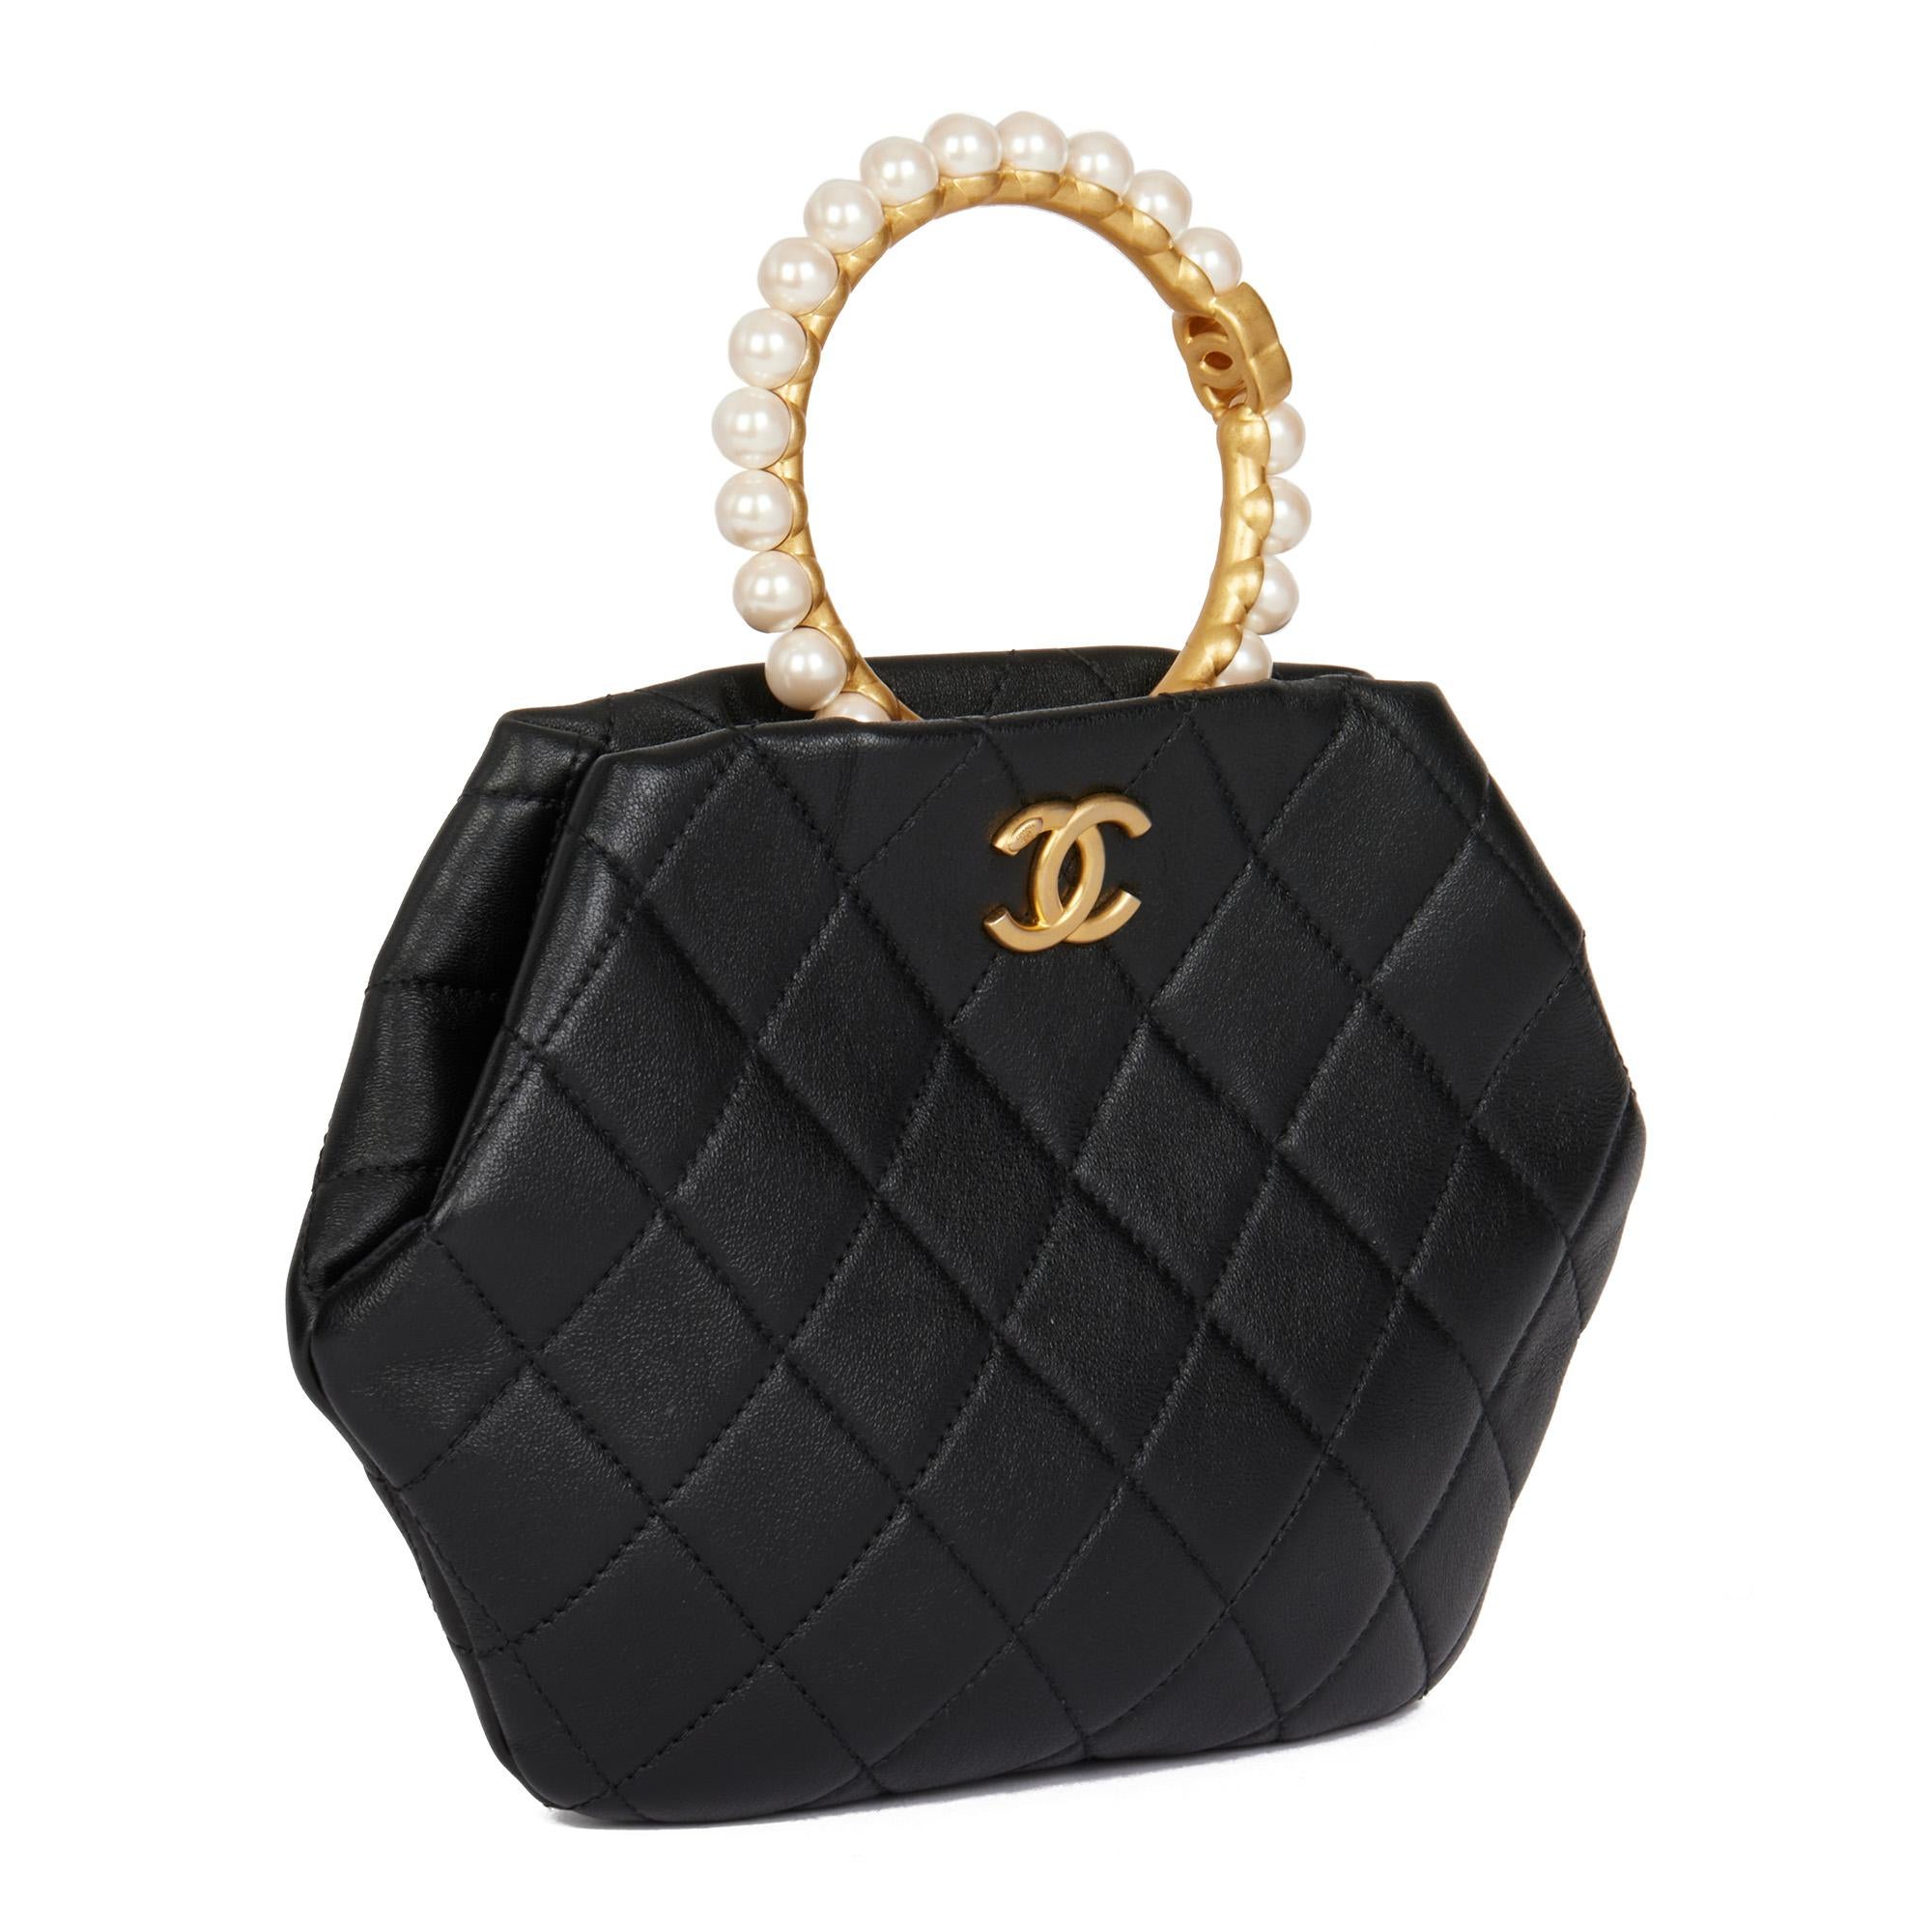 CHANEL
Black Quilted Lambskin Pearl Handle Clutch 

Xupes Reference: HB4656
Serial Number: C39UE3A7
Age (Circa): 2022
Accompanied By: Chanel Dust Bag, Box, Care Booklet
Authenticity Details: Microchip (Made in Italy)
Gender: Ladies
Type: Top Handle,